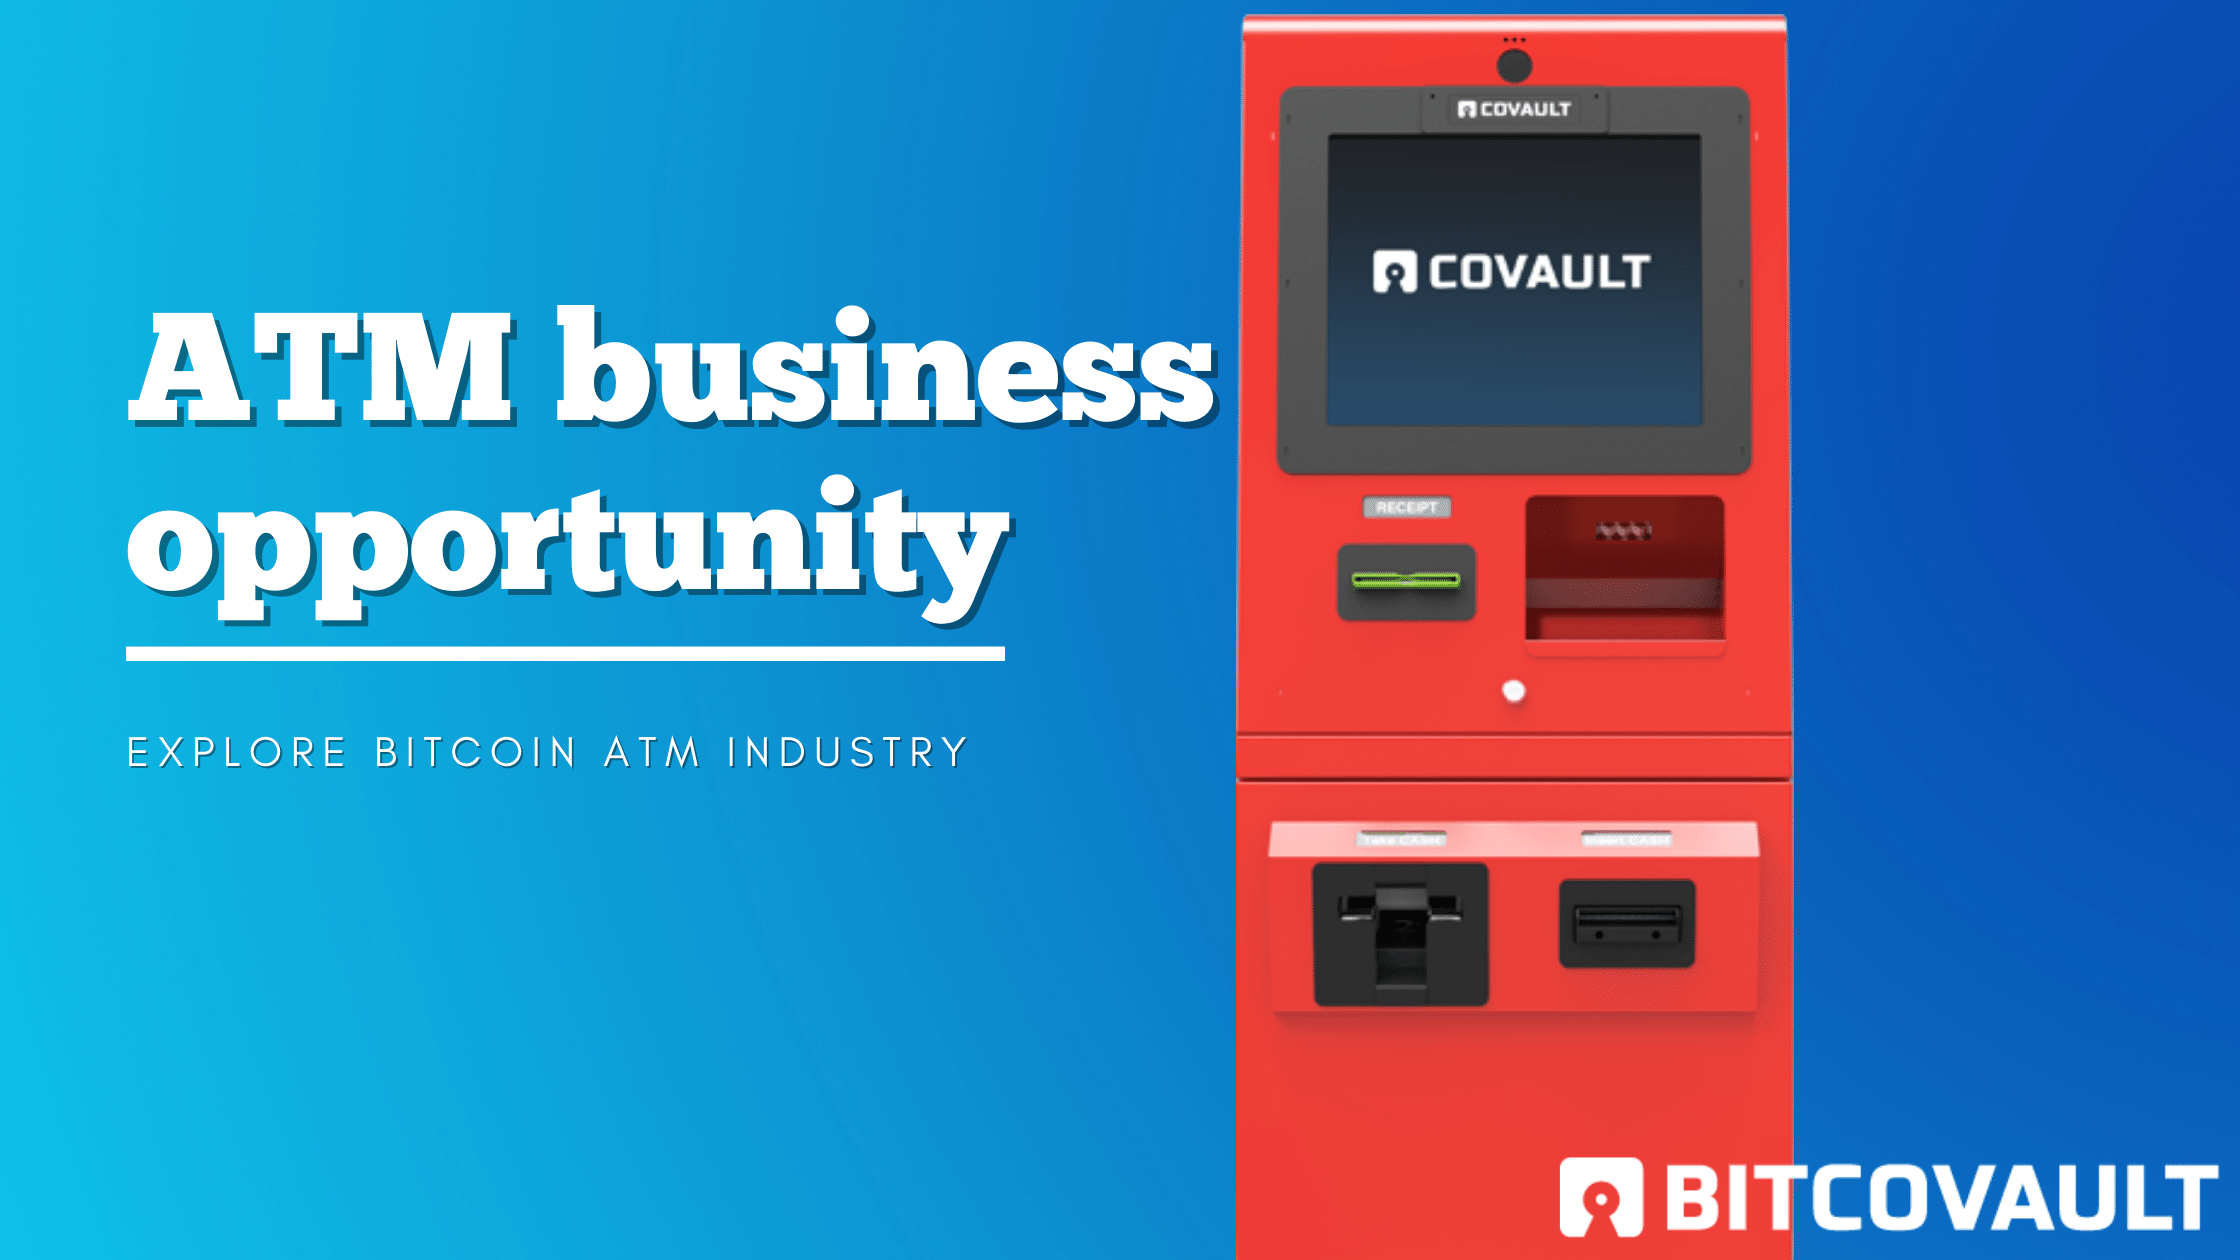 Atm business opportunity